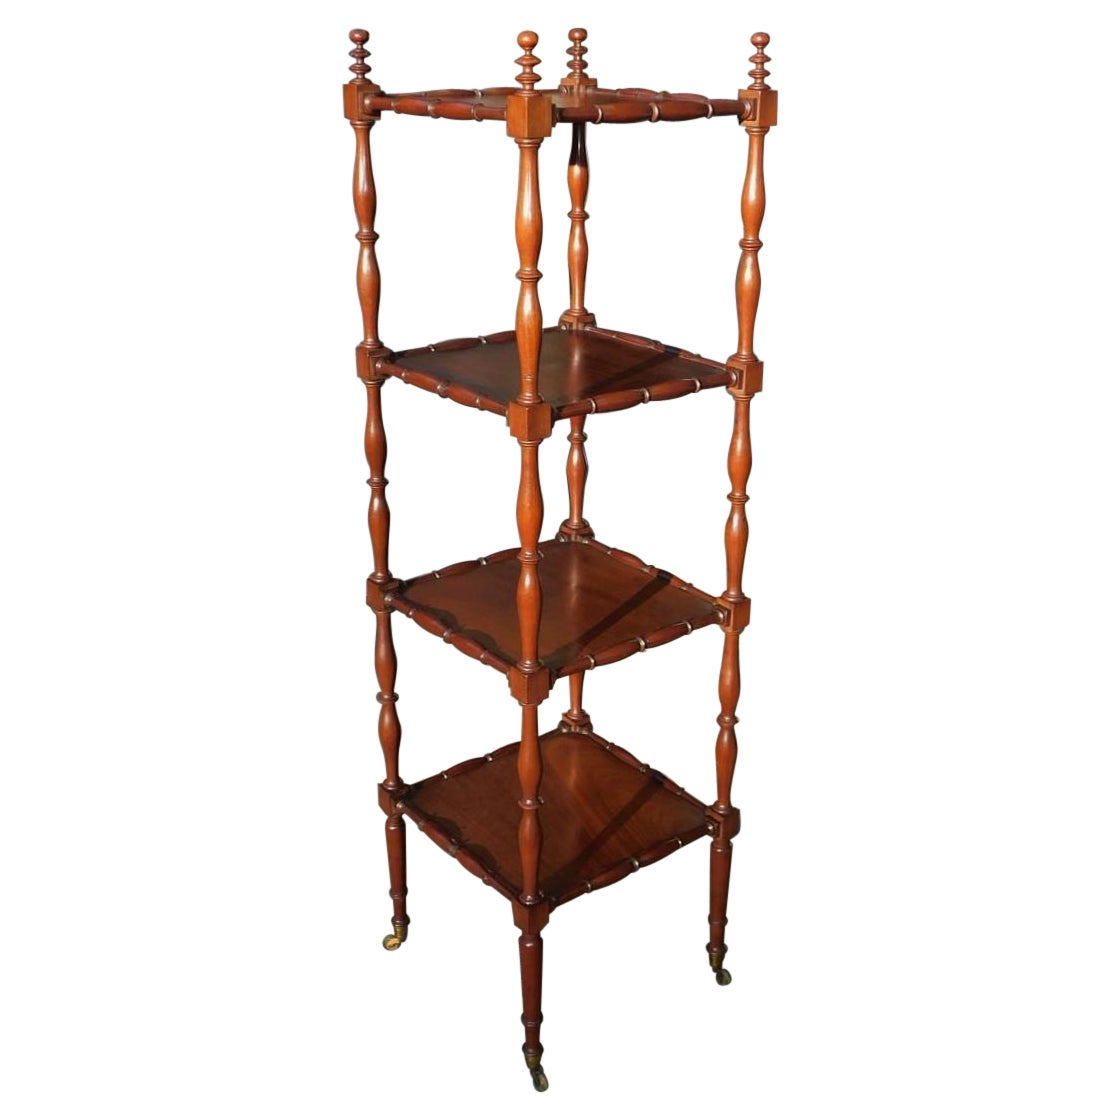 English Regency Mahogany Four Tiered Finial Etagere with Brass Casters, C. 1800 For Sale